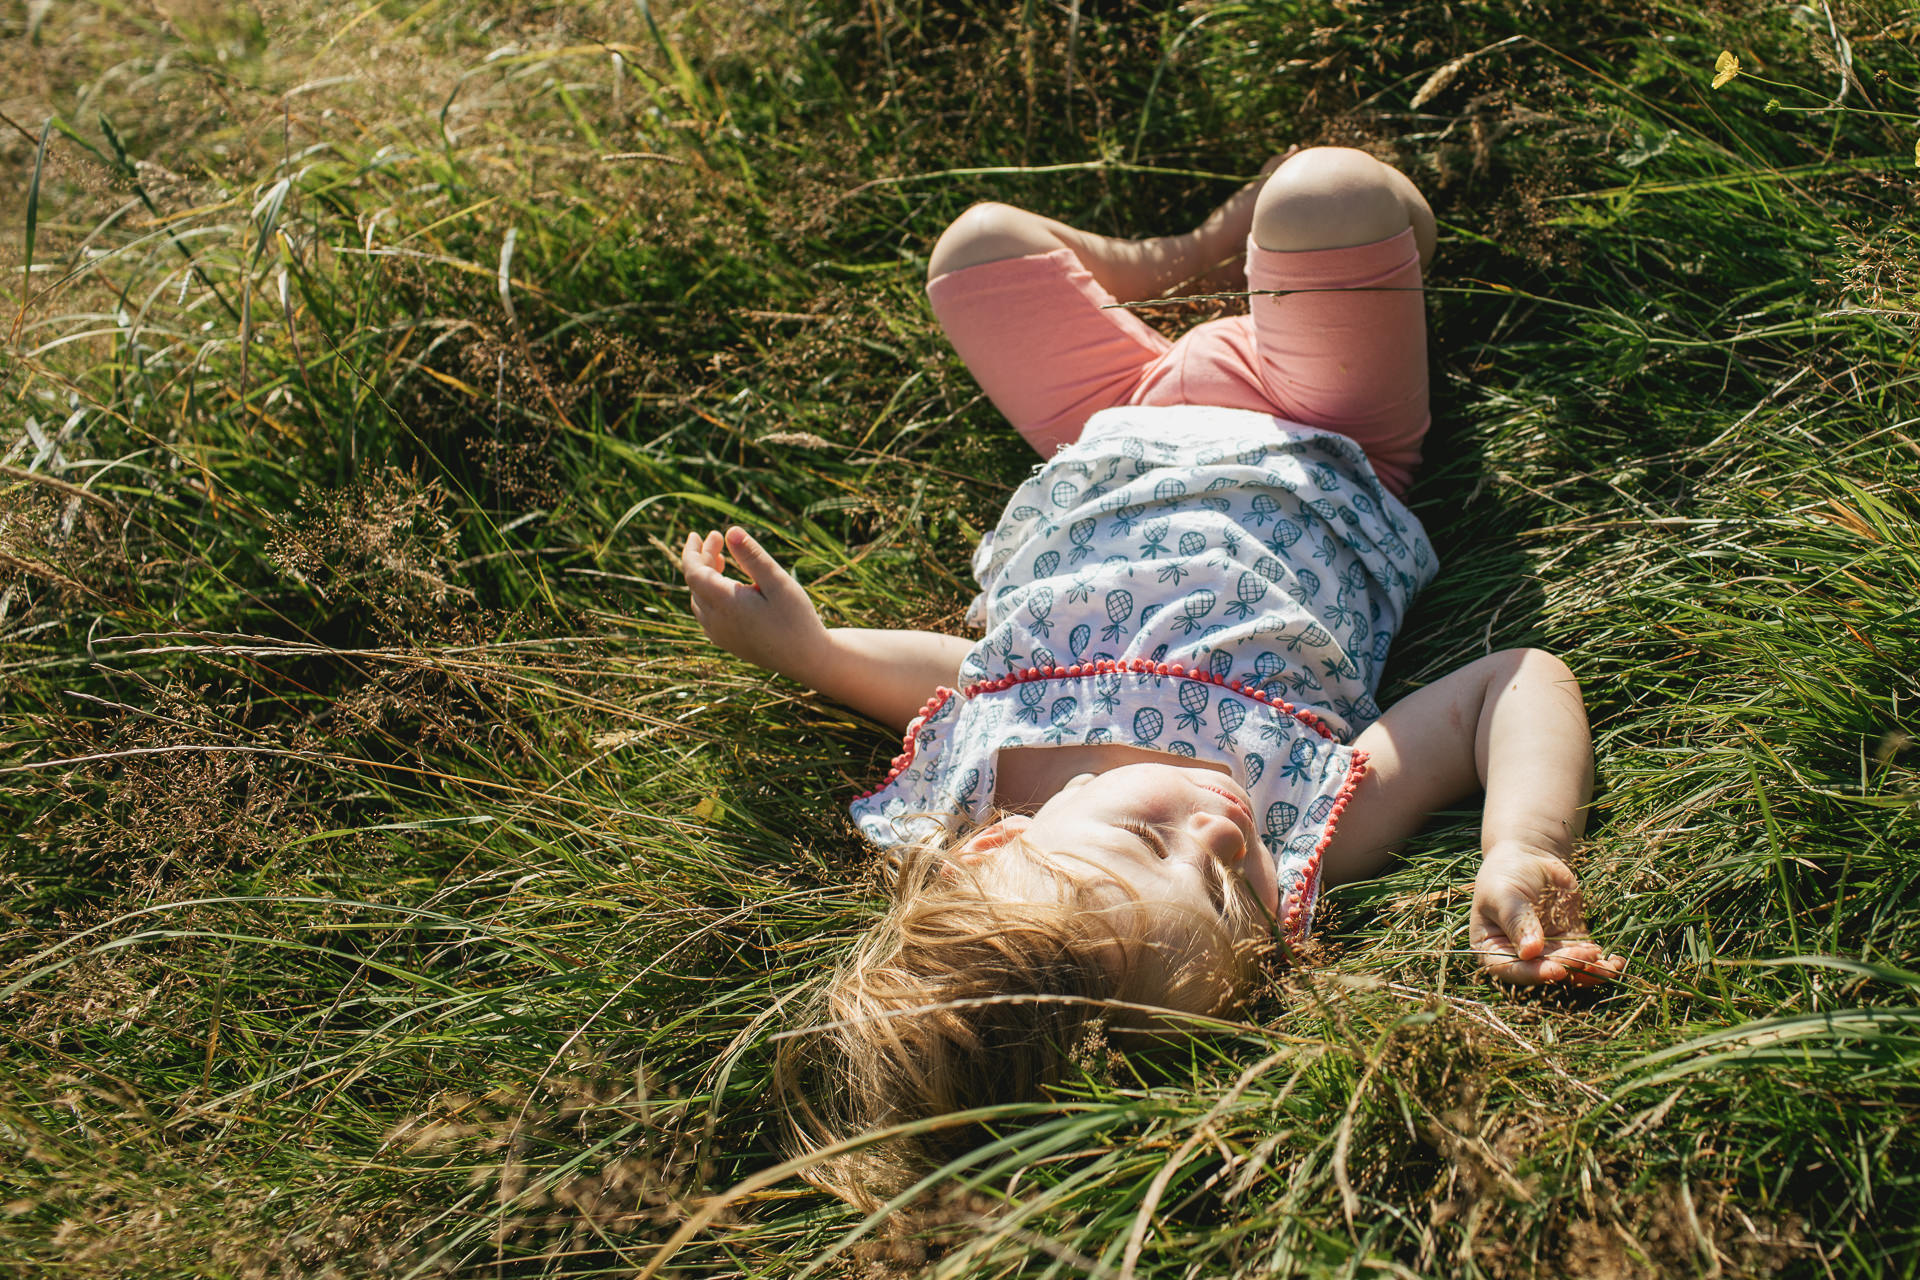 A young girl rolling in long grass